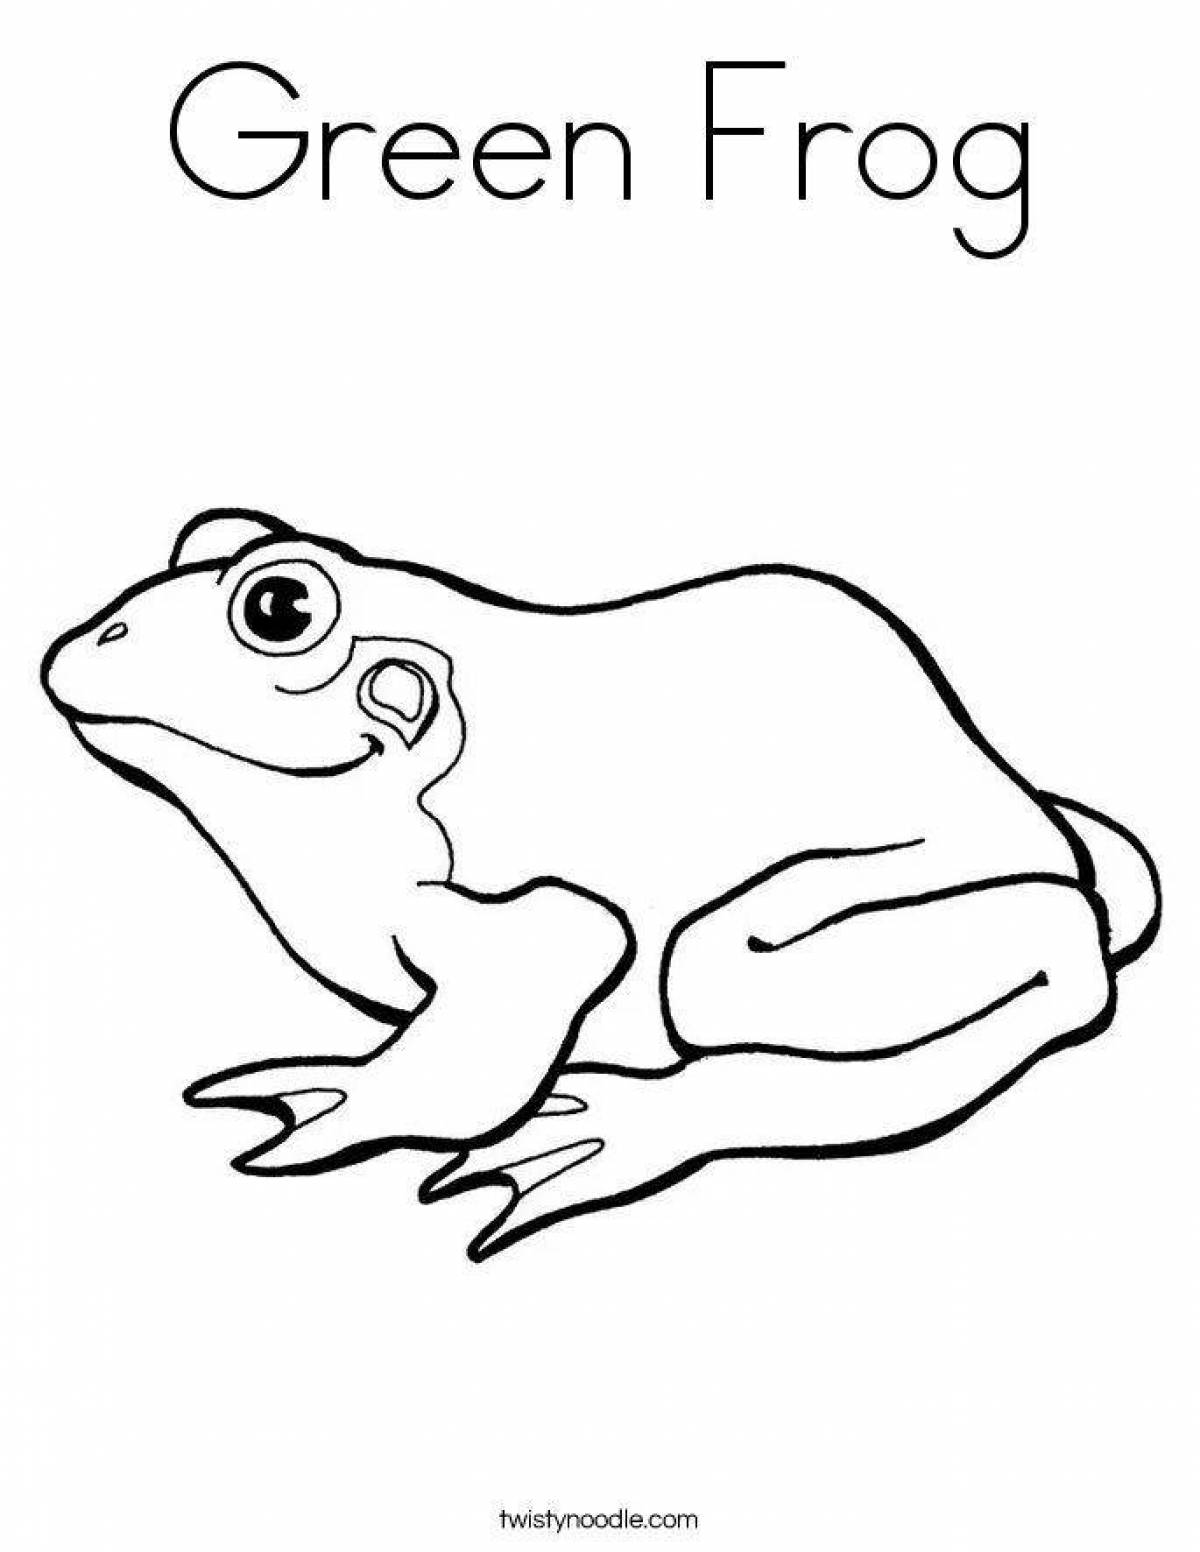 Coloring book drawing of a frog